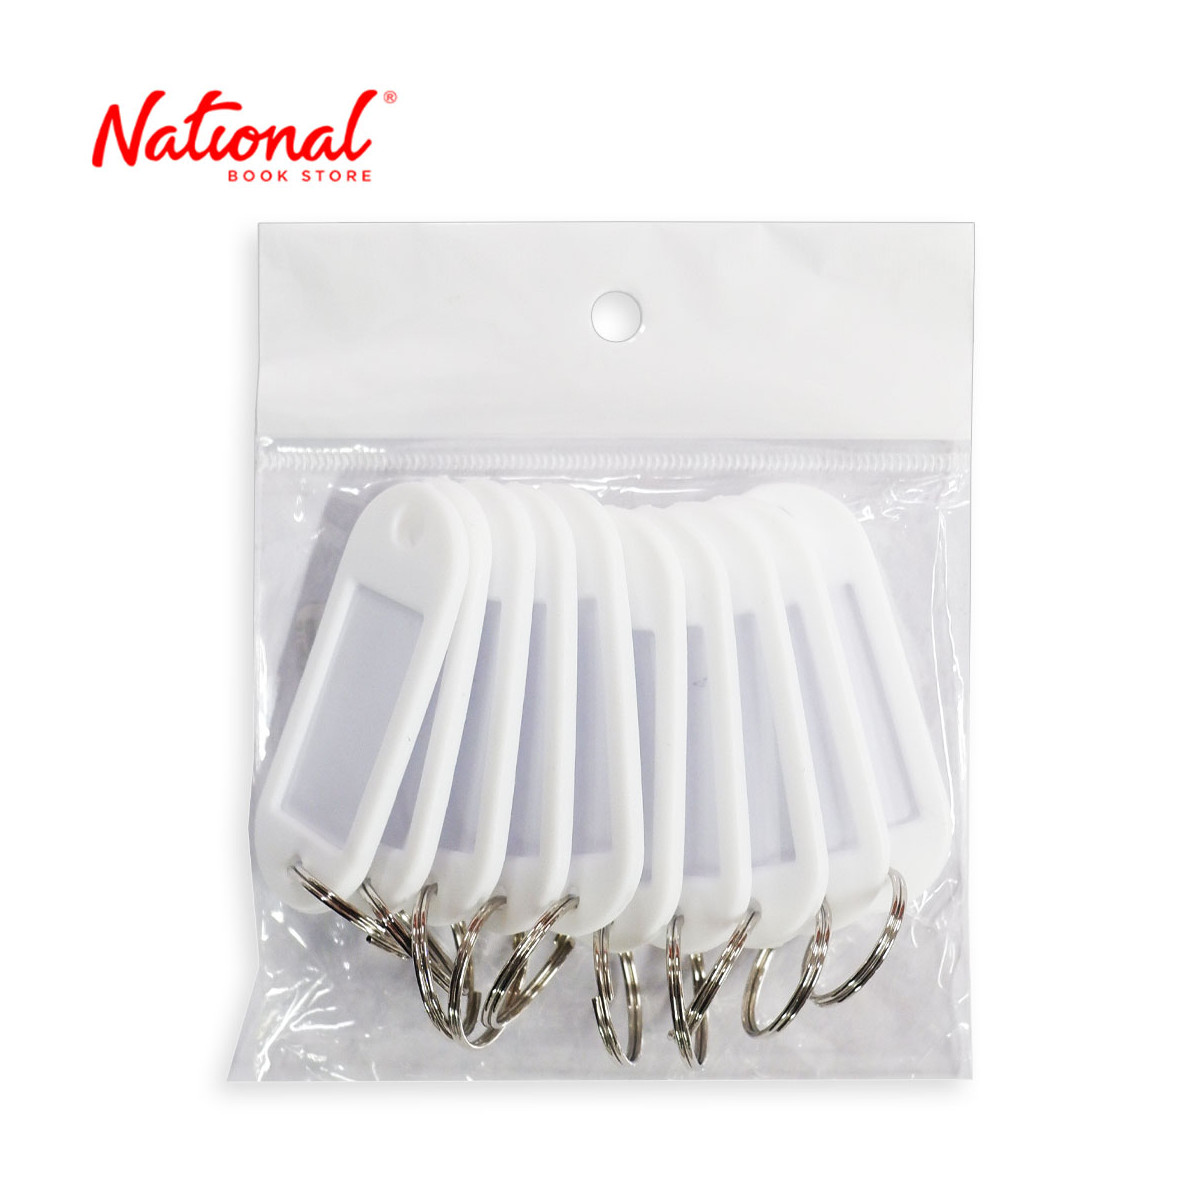 Tiger Key Tags 10 pieces Per Pack, White - Home & Office Stationery - Filing Accessories